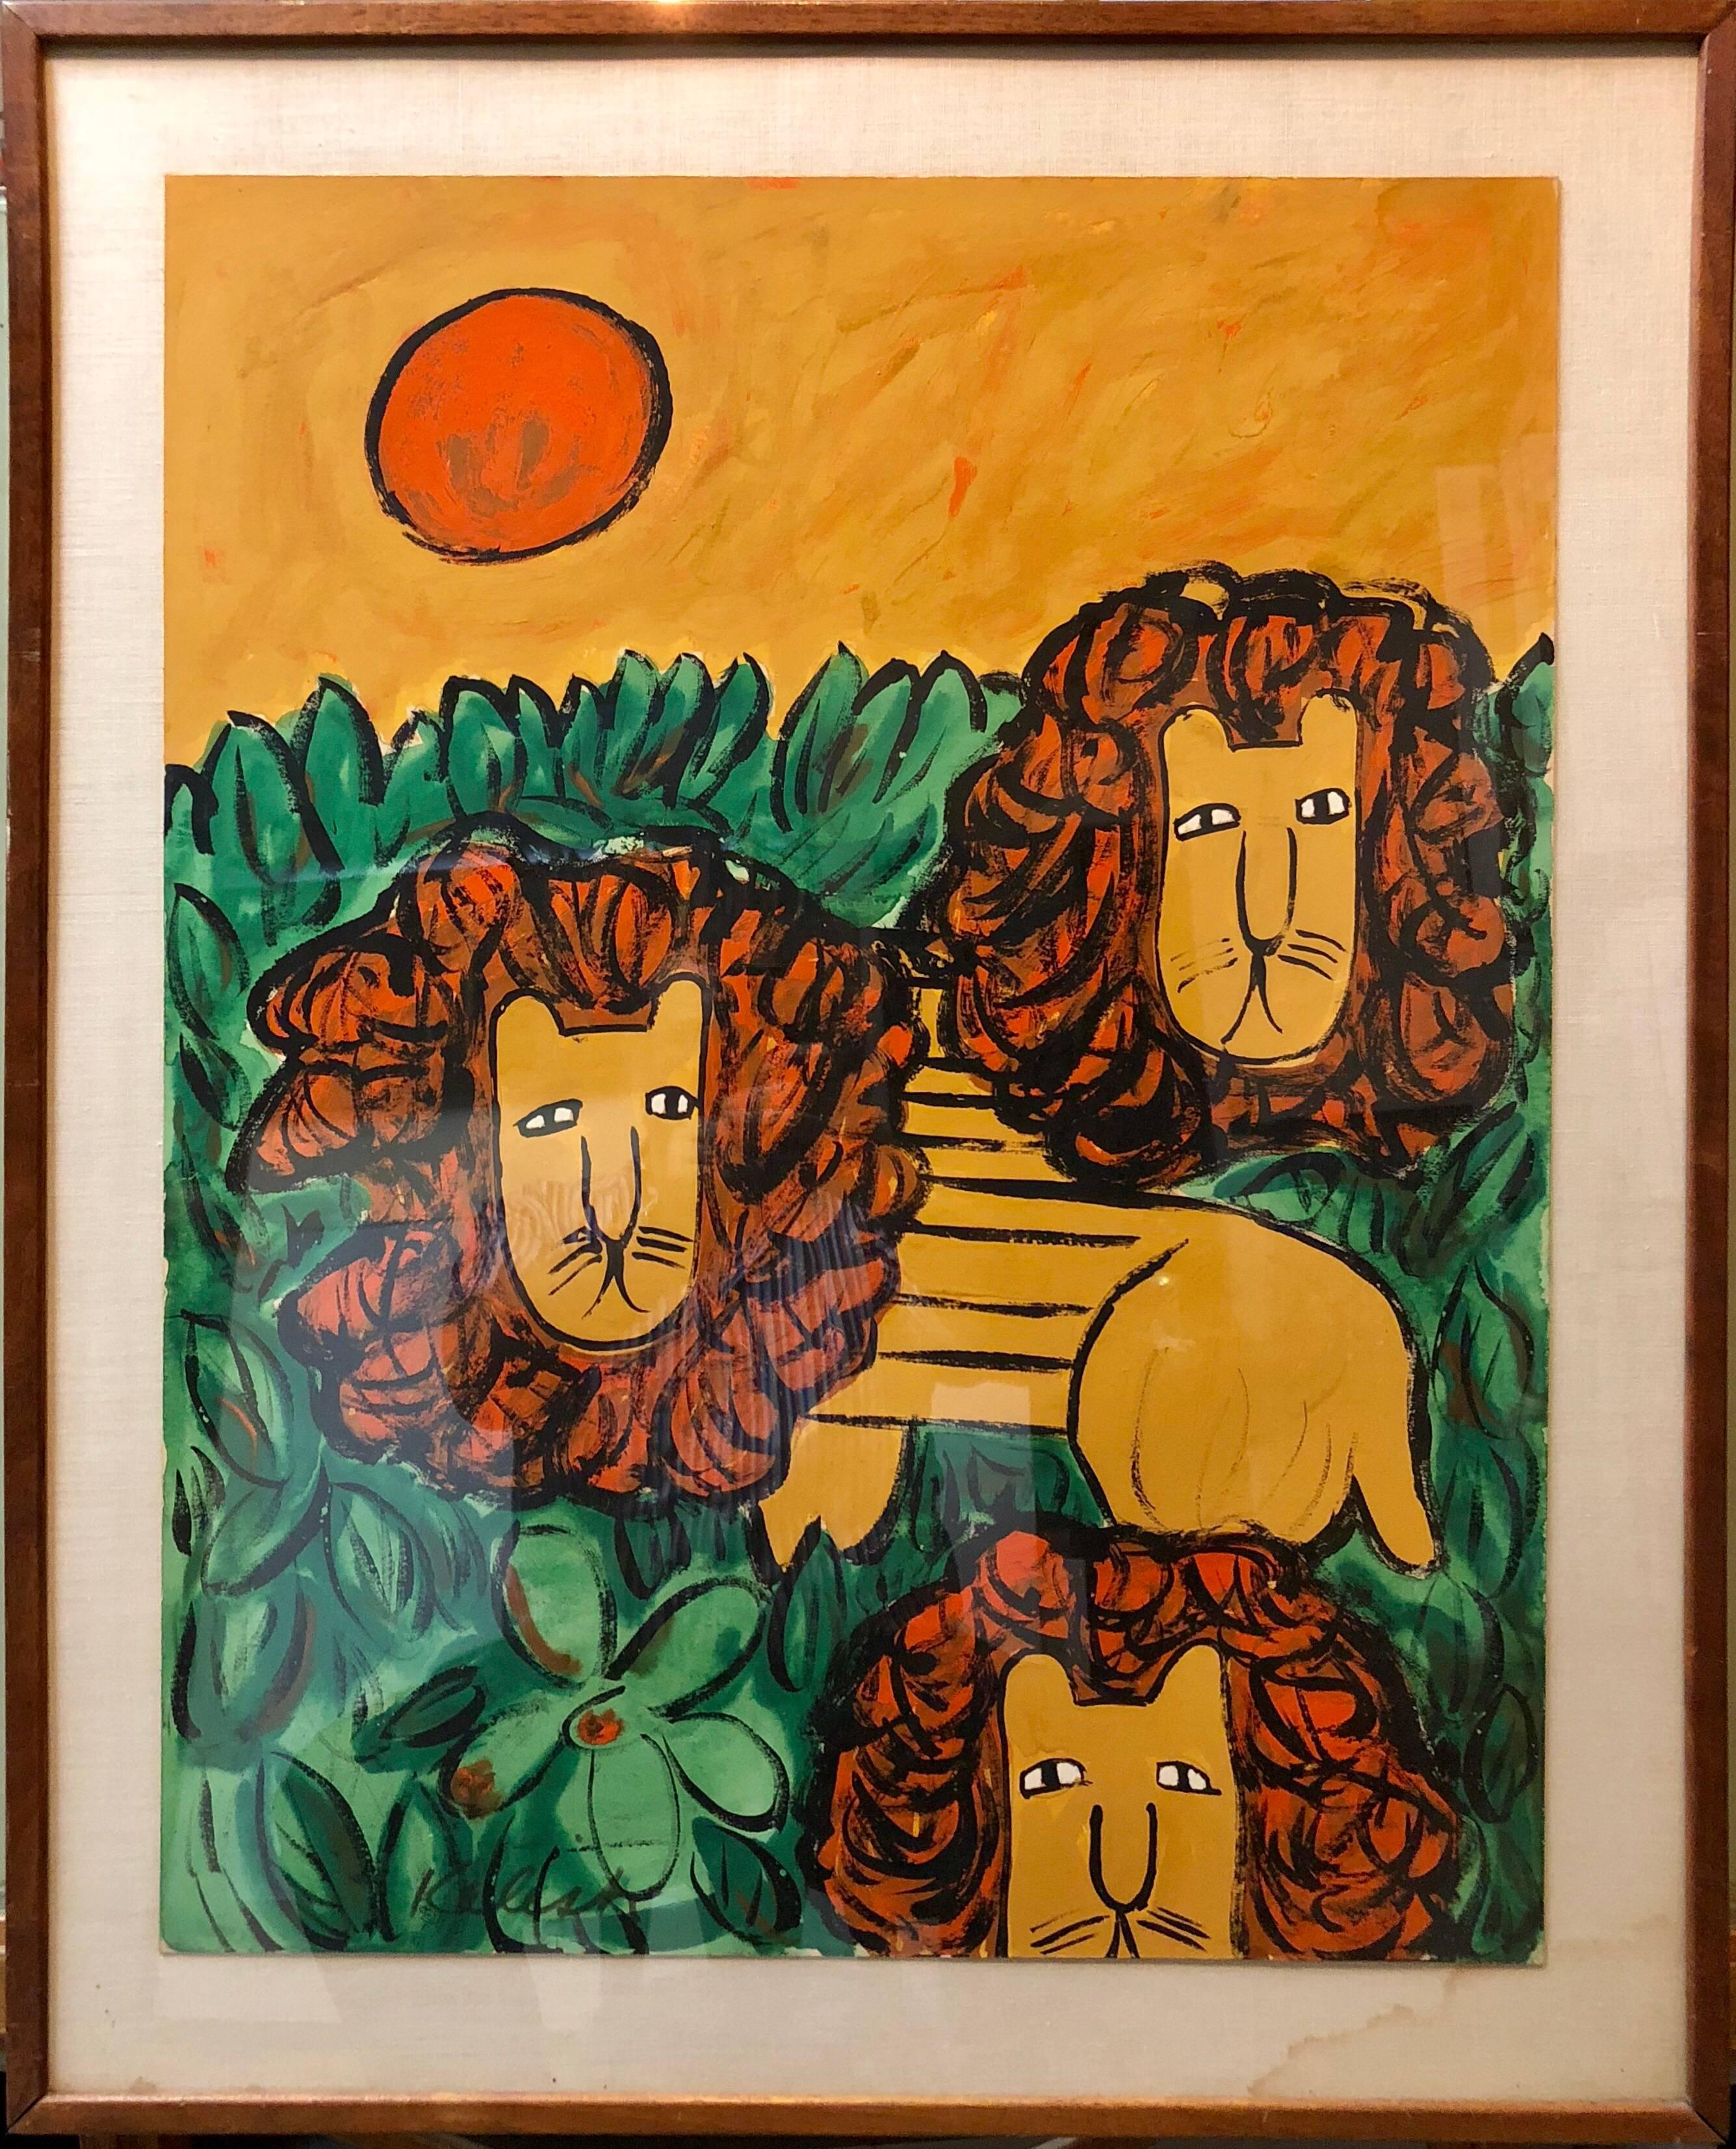 Original Oil Painting LIONS in a Modernist Illustration Mod Naive Graphic Style - Black Animal Painting by Lionel Kalish